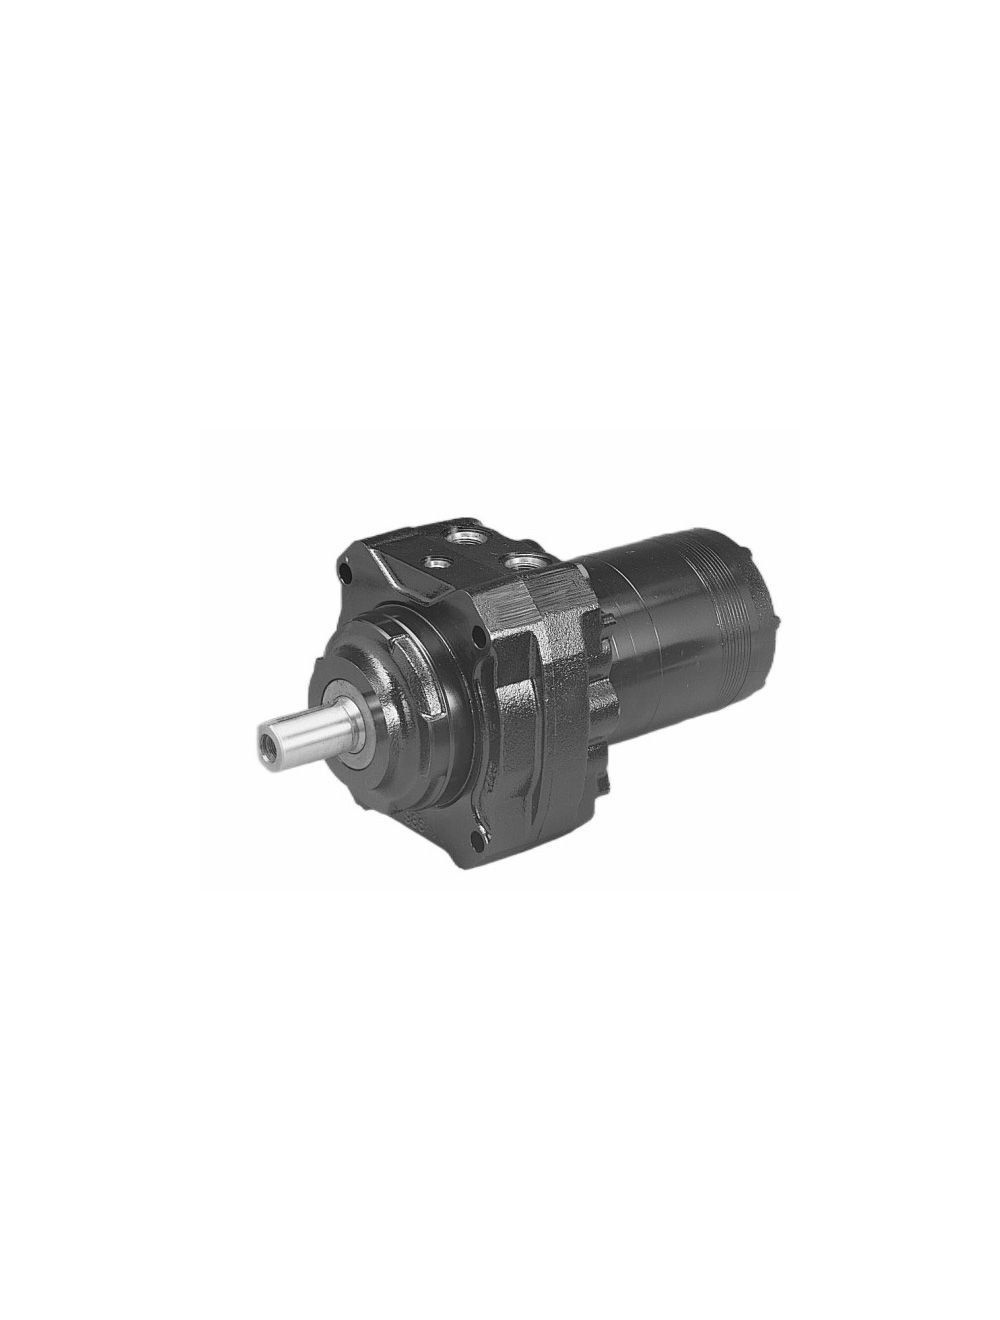 New In stock for sale, PARKER Hydraulic Motor BH-0530